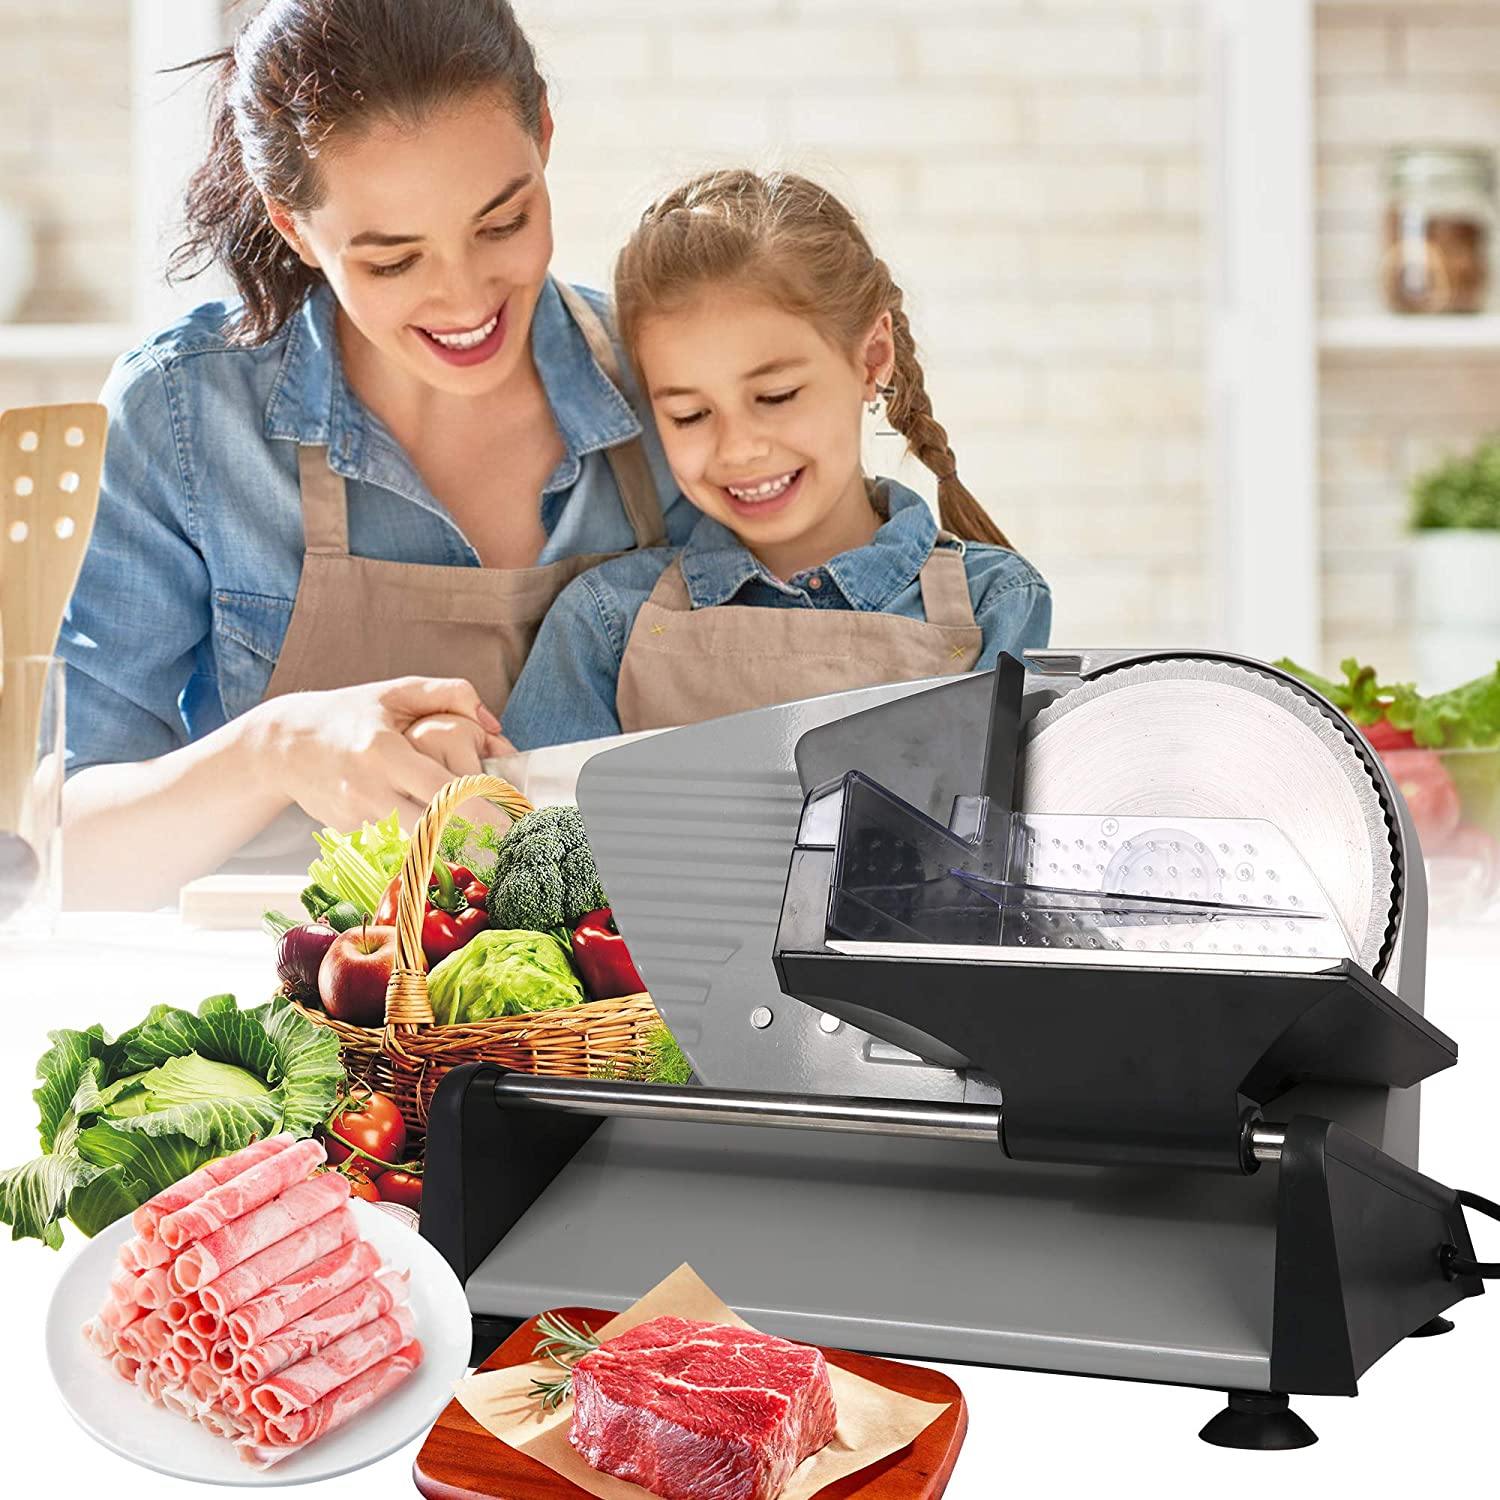 150W Electric Food Slicer with Removable 7.5” Stainless Steel Blade, Anti-Slip Rubber Feet,Meat,Cheese, Bread, Fruit & Vegetables for Home Use - Bosonshop